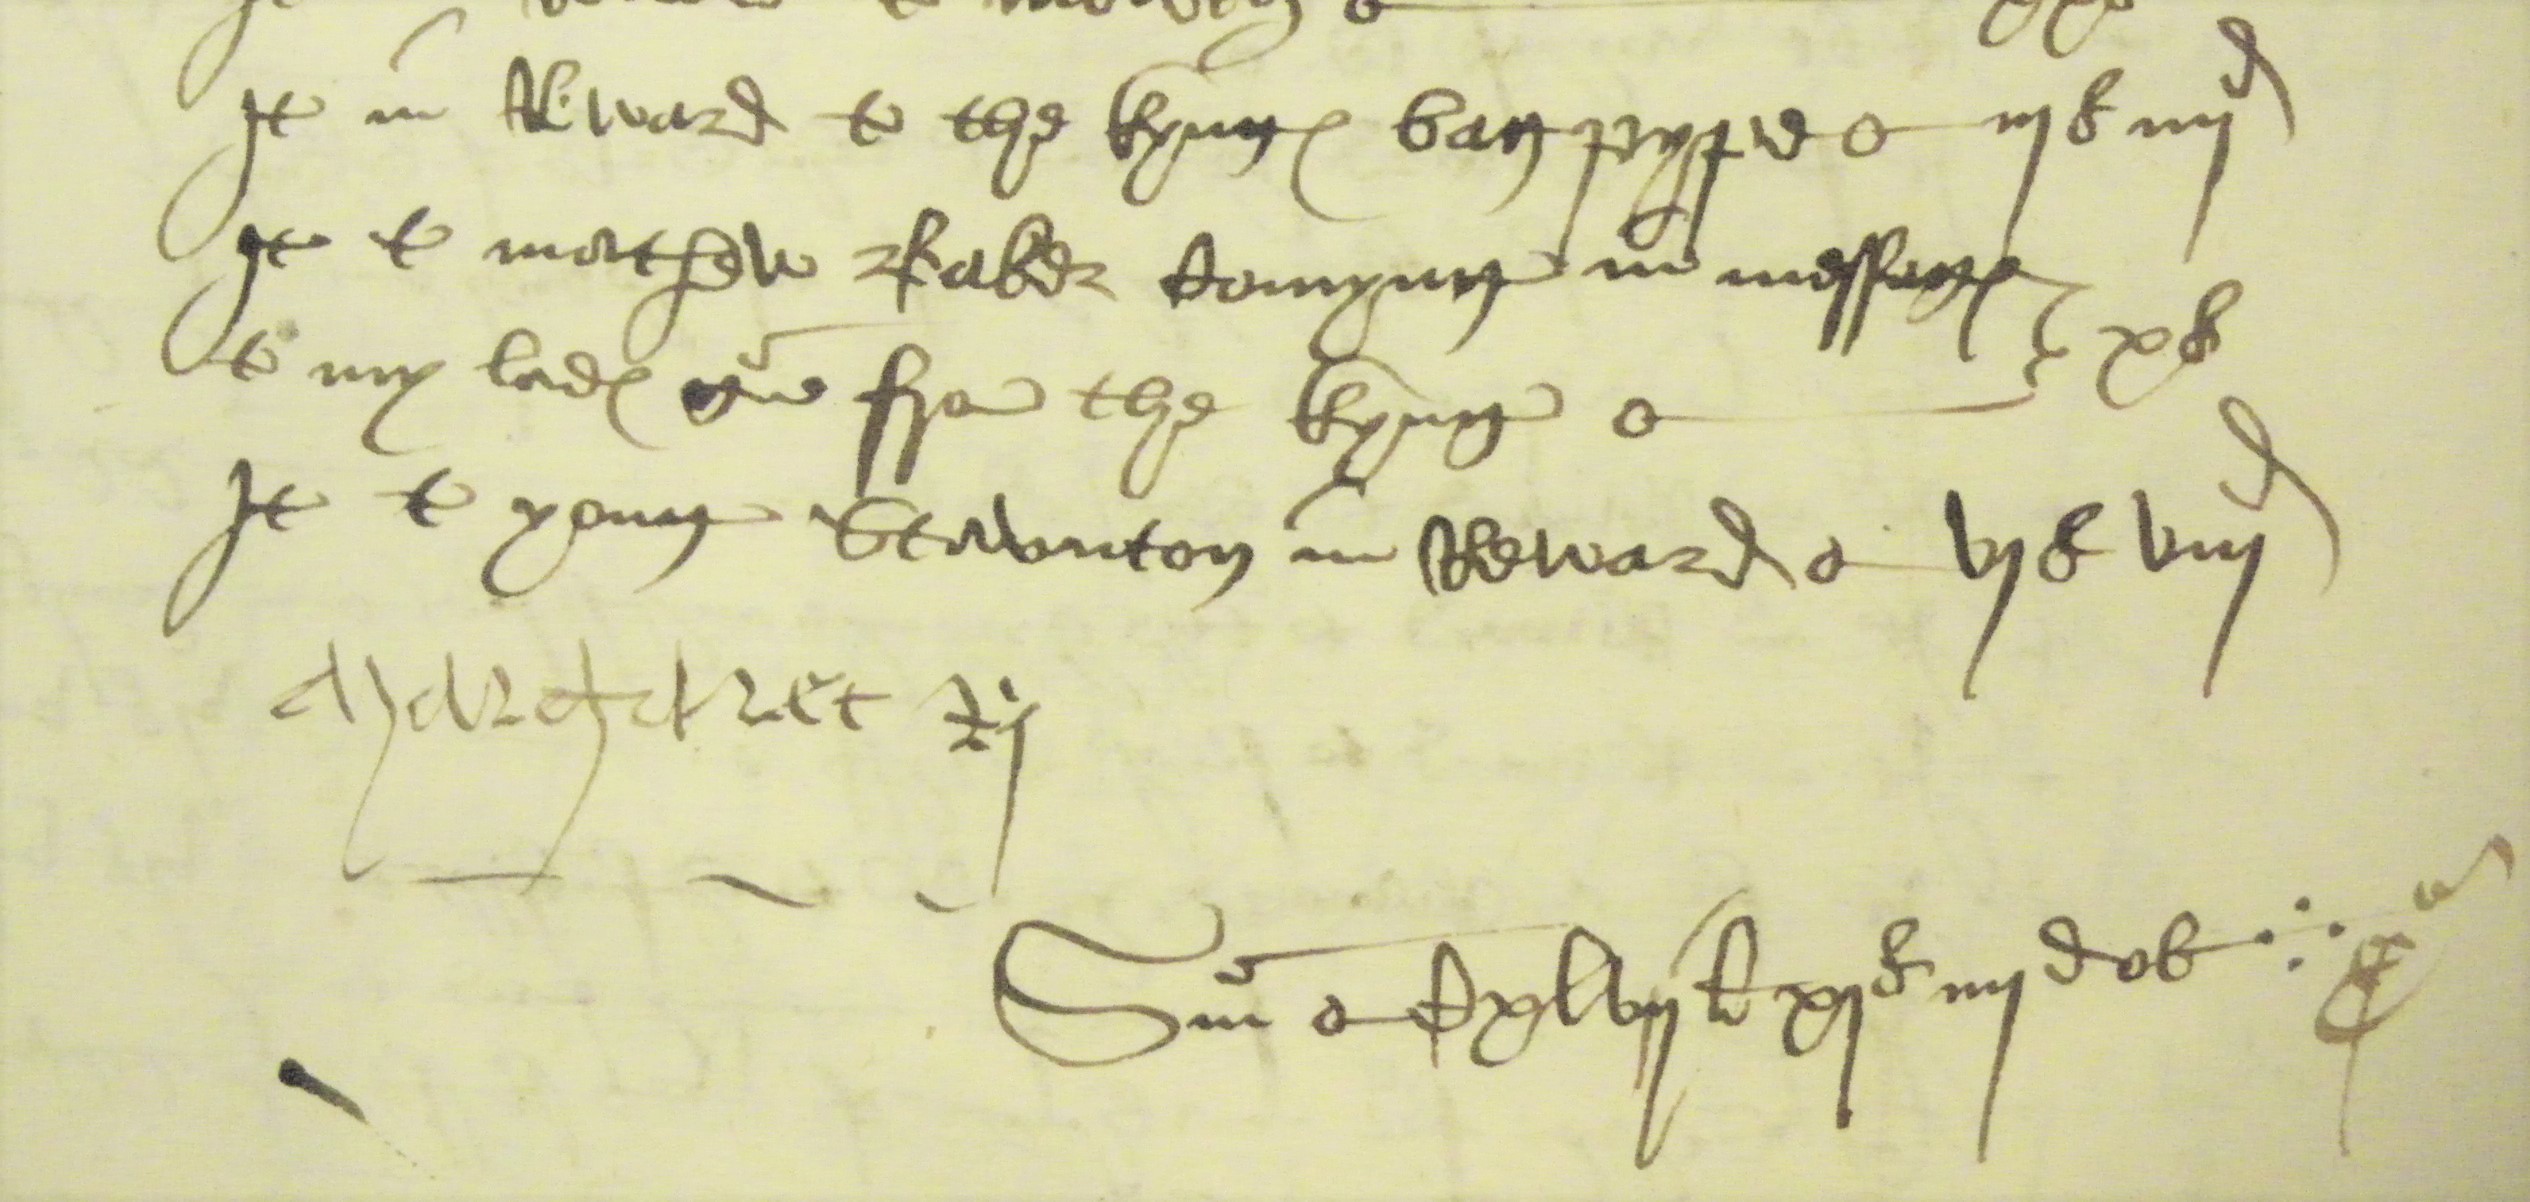 Entries in accounts book, beginning with payment to the King's bagpiper